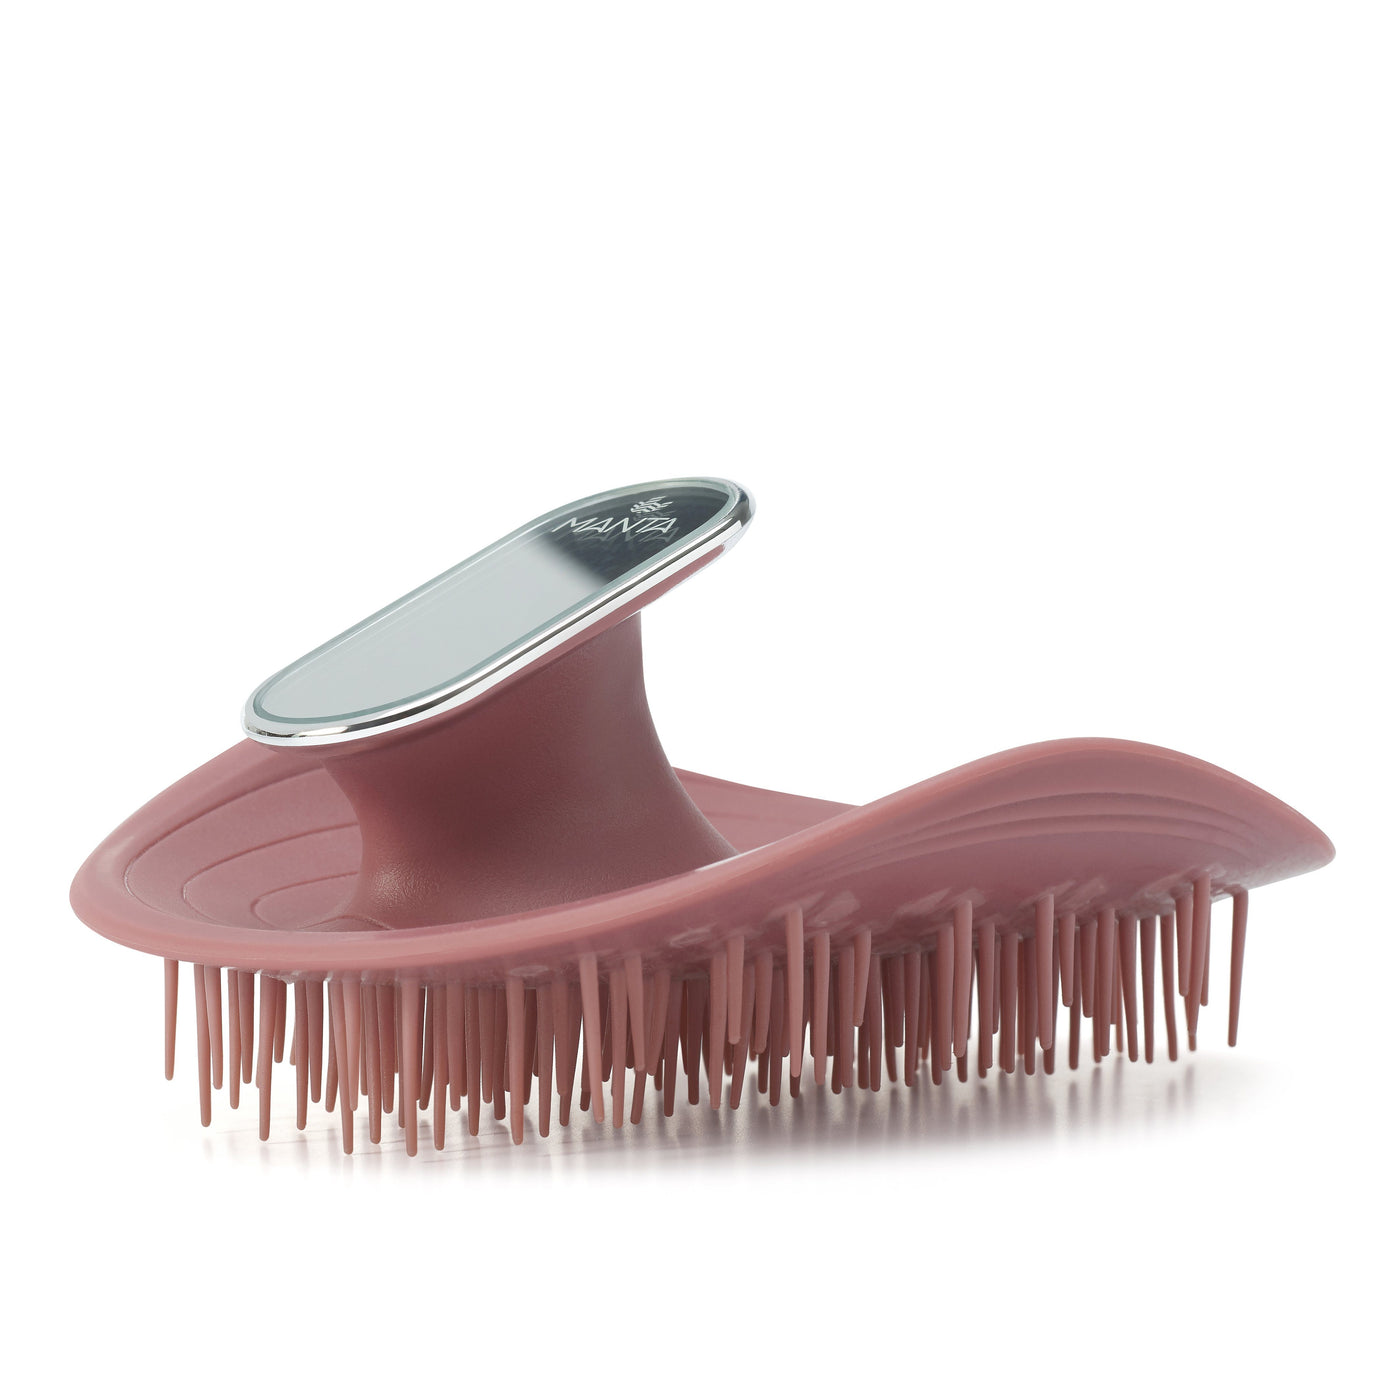 MANTA HAIR BRUSH - Cassis with mirror | Combs & Brushes | LOSHEN & CREM